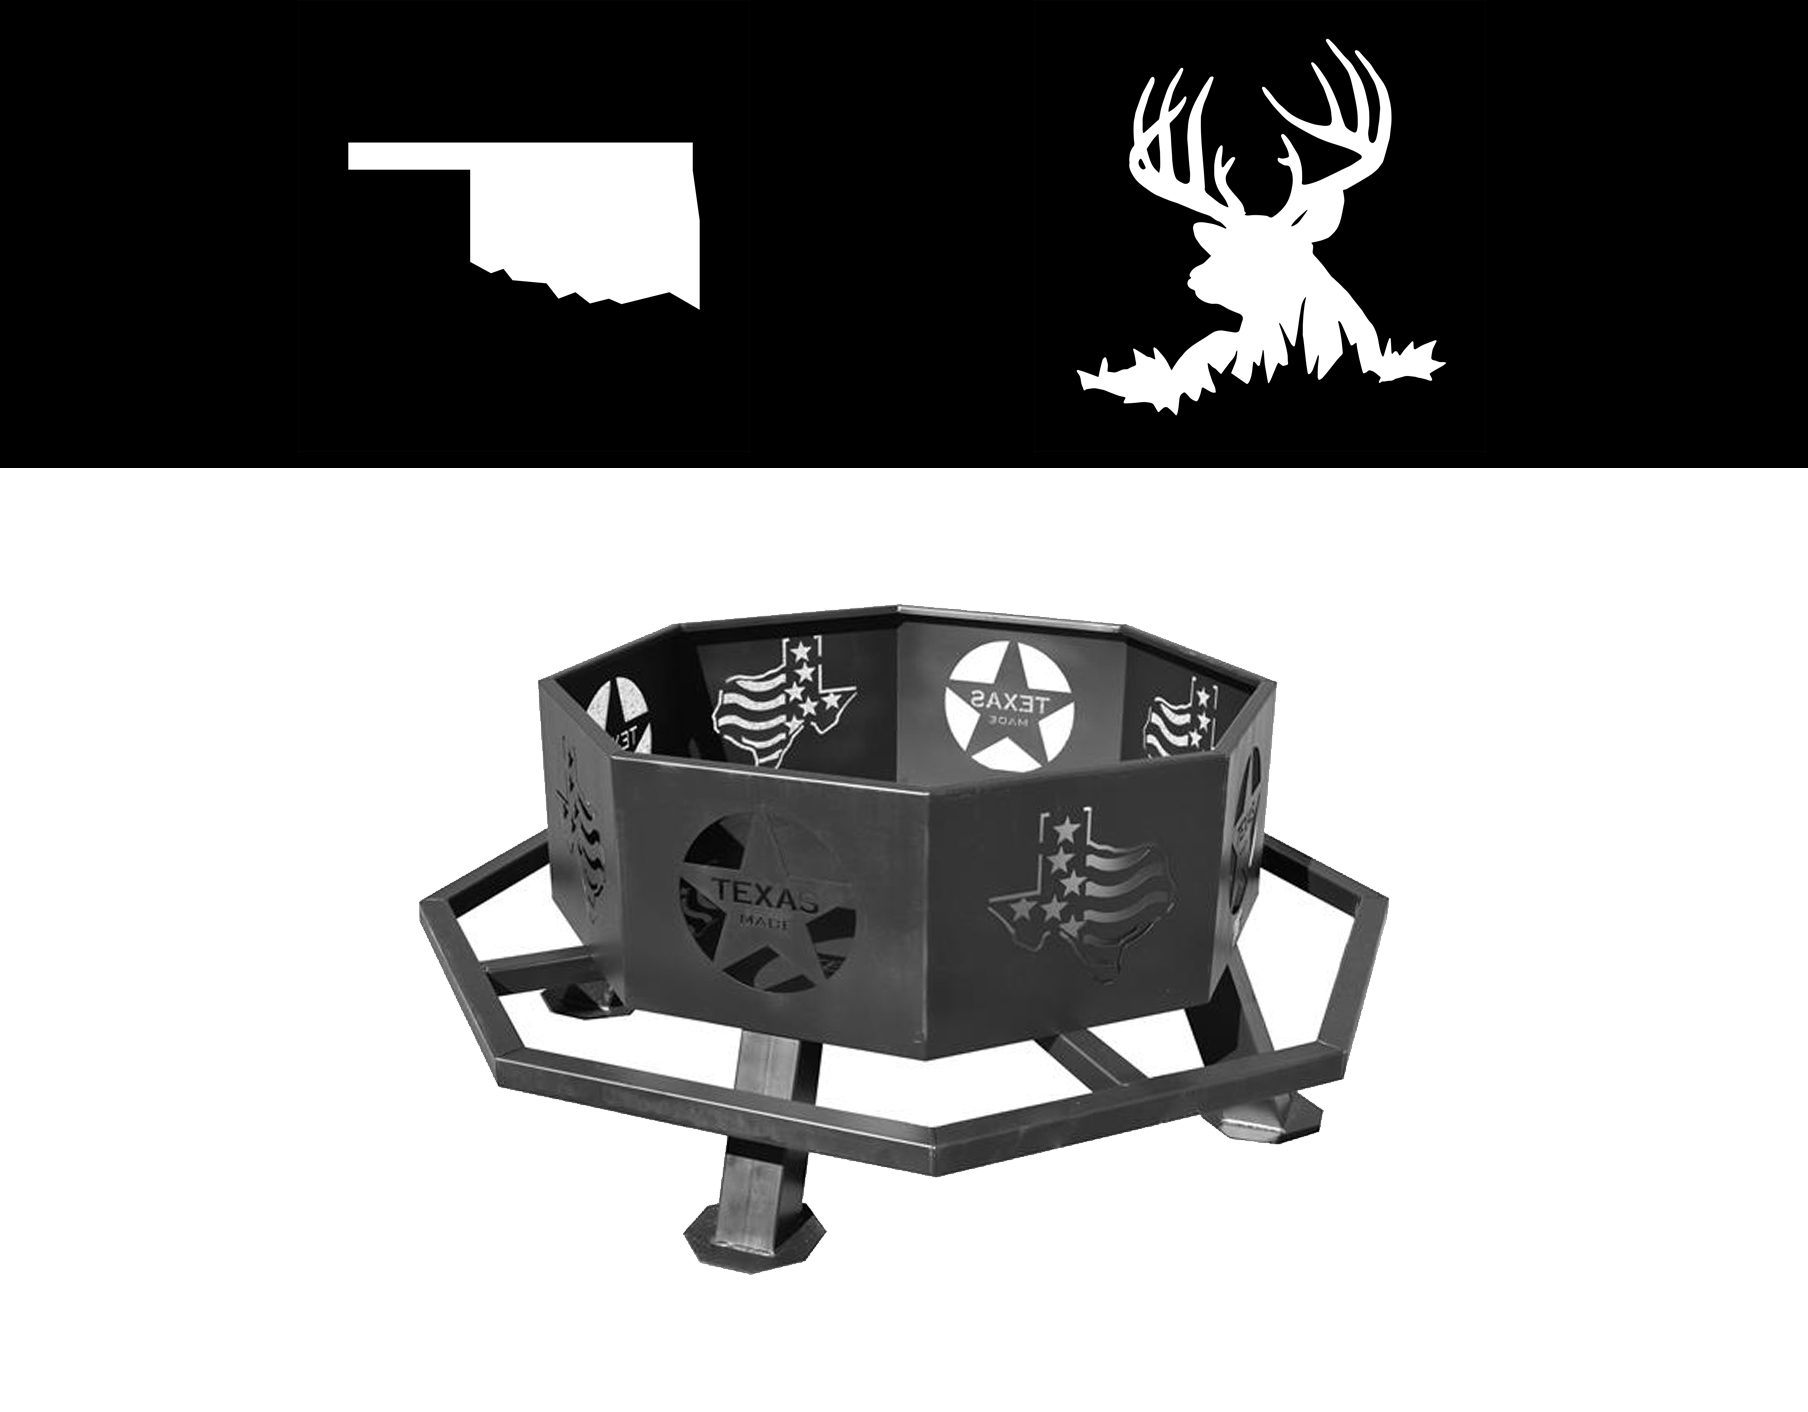 Asf Oklahoma Themed Fire Pit Cast And, Fire Pits Okc